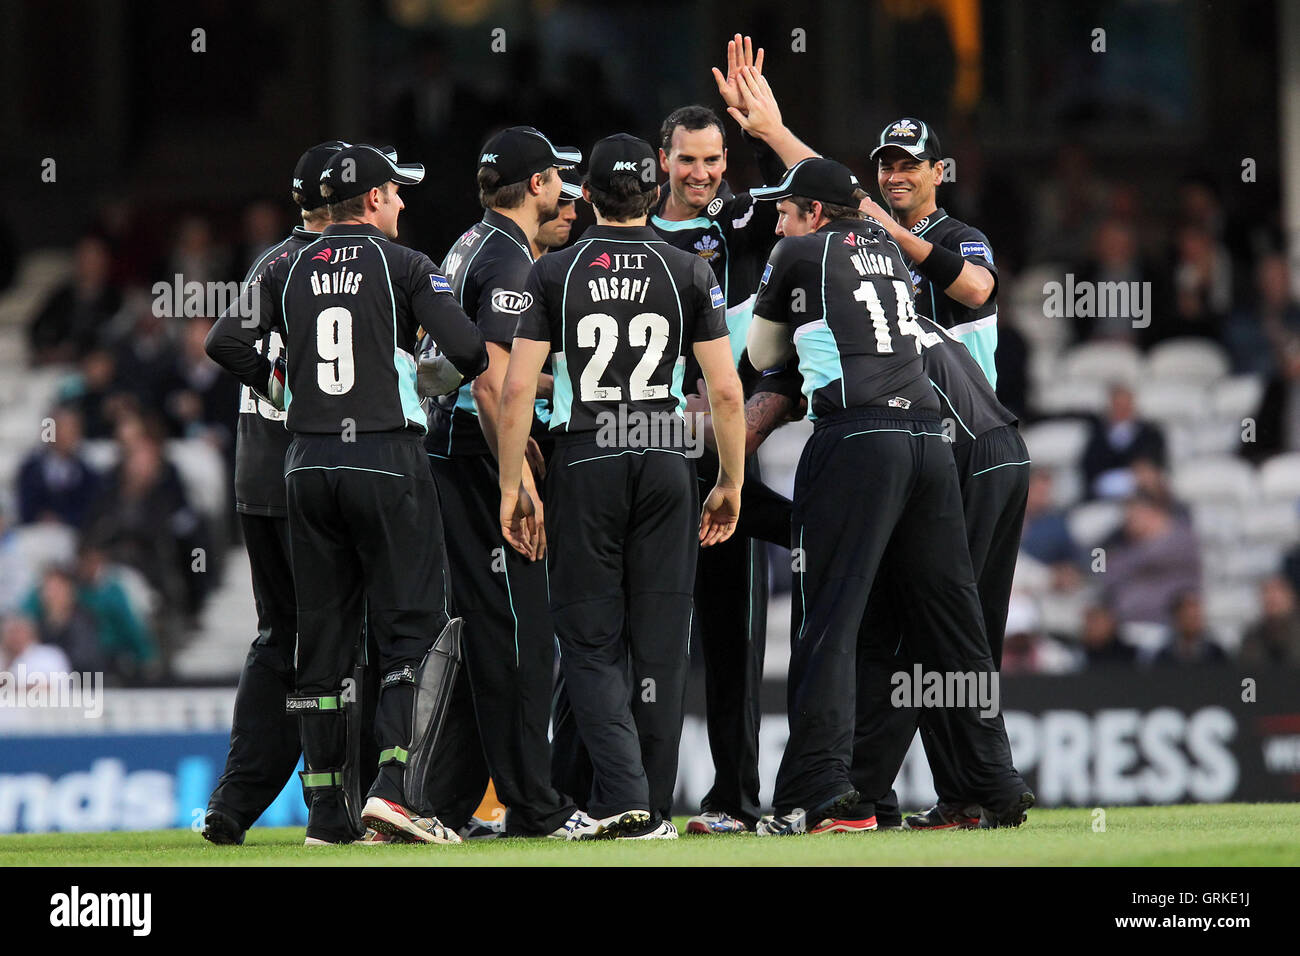 Surrey players celebrate the wicket of Ryan ten Doeschate - Surrey Lions vs Essex Eagles - Friends Life T20 South Division Cricket at the Kia Oval,London - 13/06/12. Stock Photo